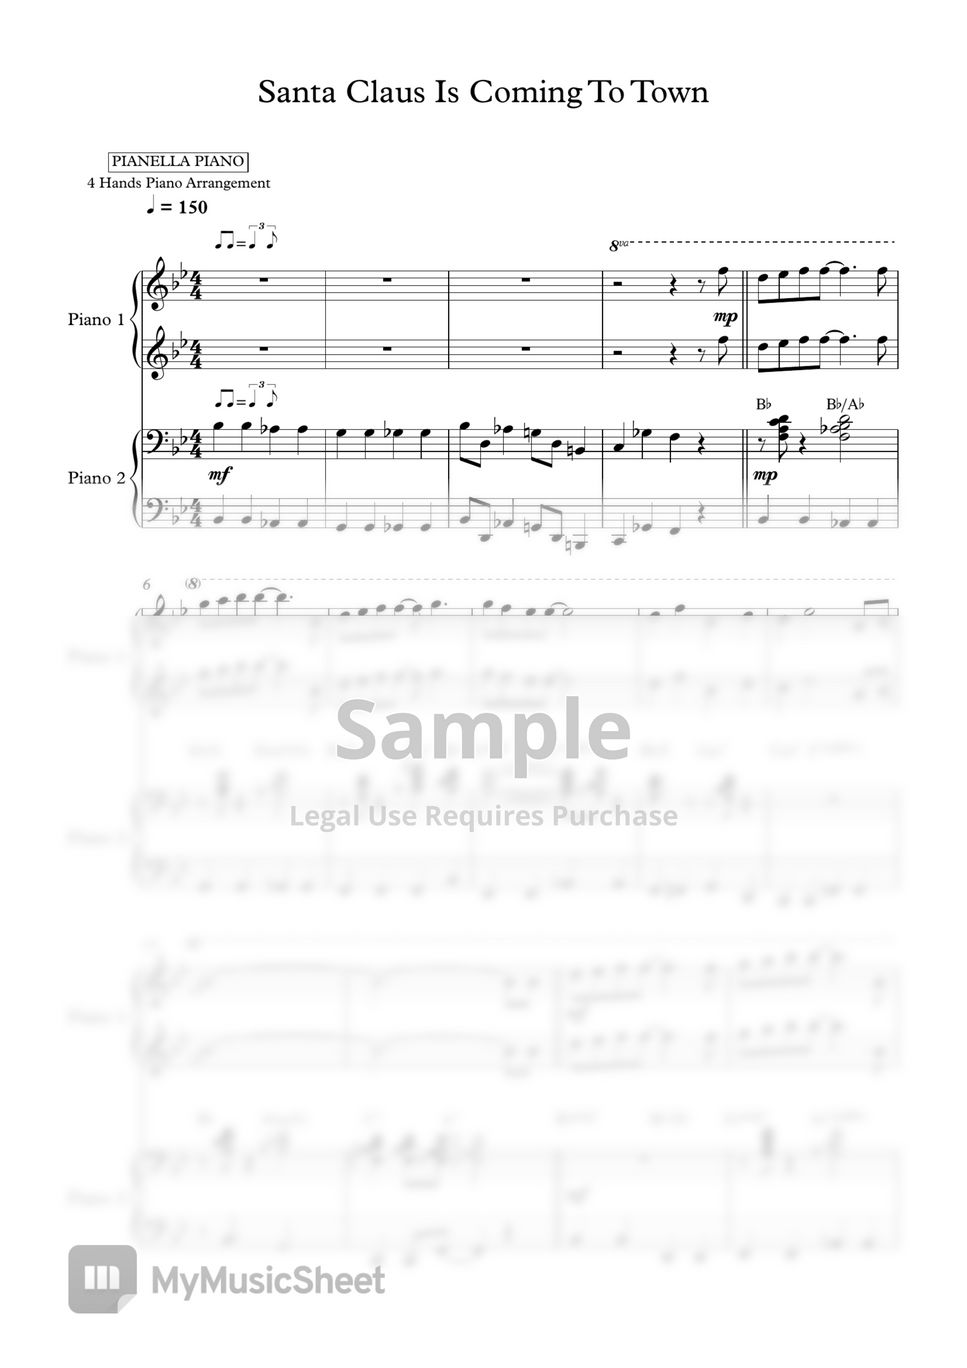 Michael Buble - Santa Claus Is Coming To Town (Piano Sheet) by Pianella Piano